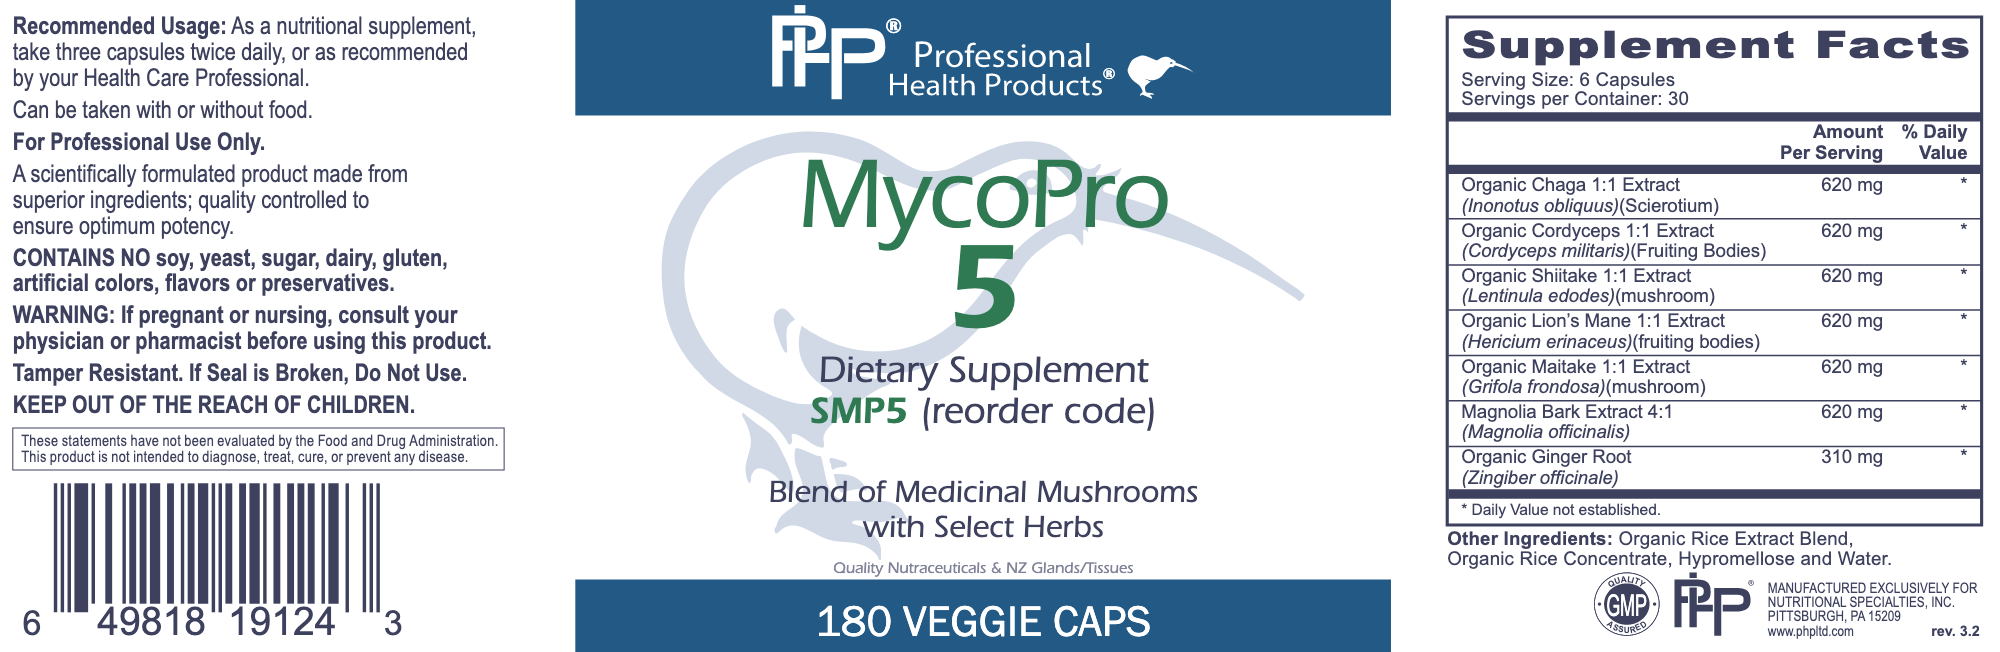 MycoPro 5 (180 Capsules)-Vitamins & Supplements-Professional Health Products-Pine Street Clinic